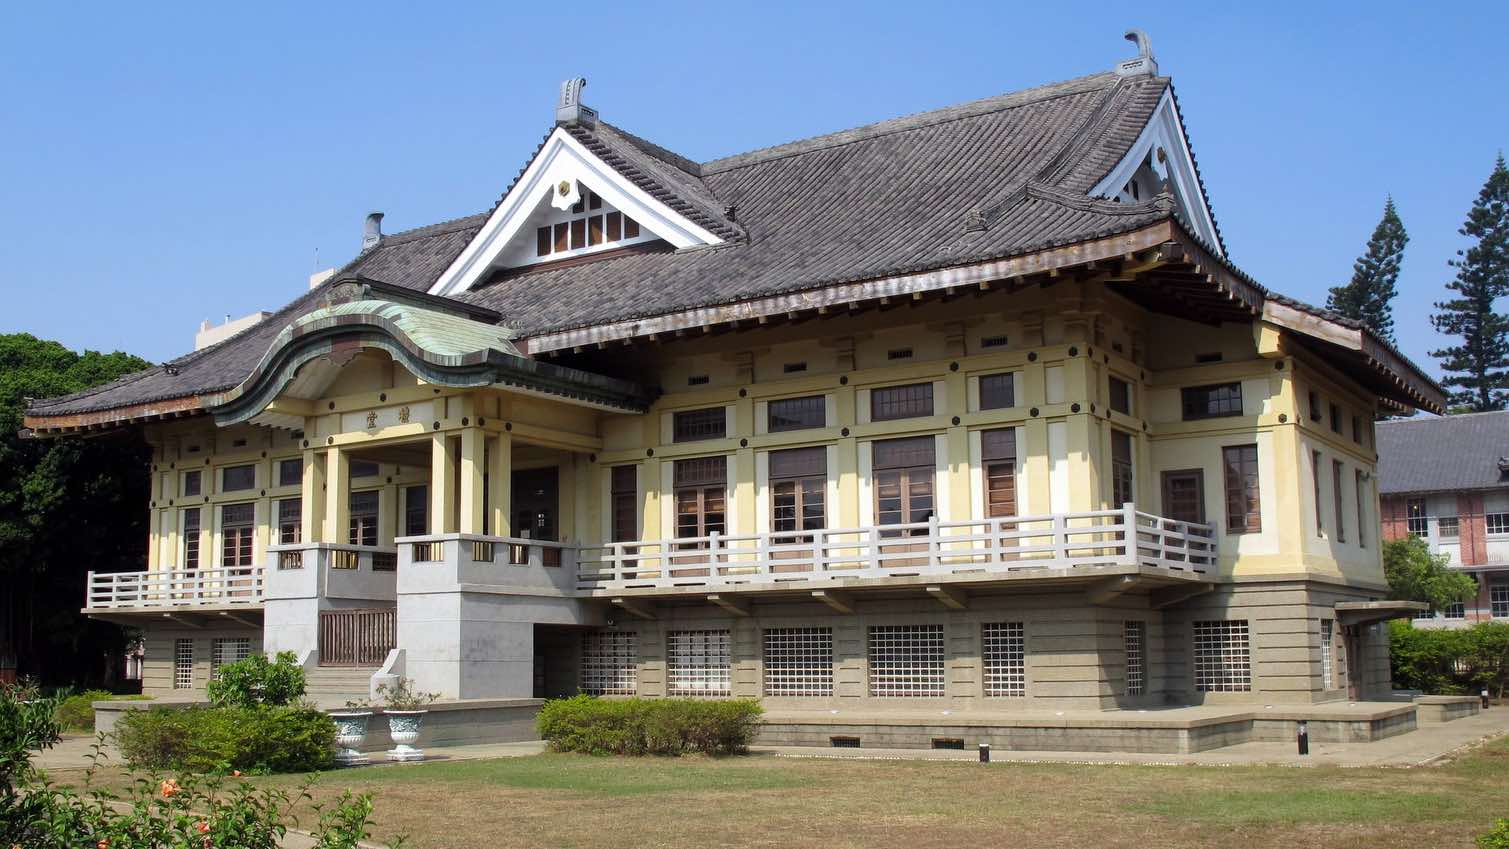 Japanese Architecture - Old Tainan Martial Arts Academy 